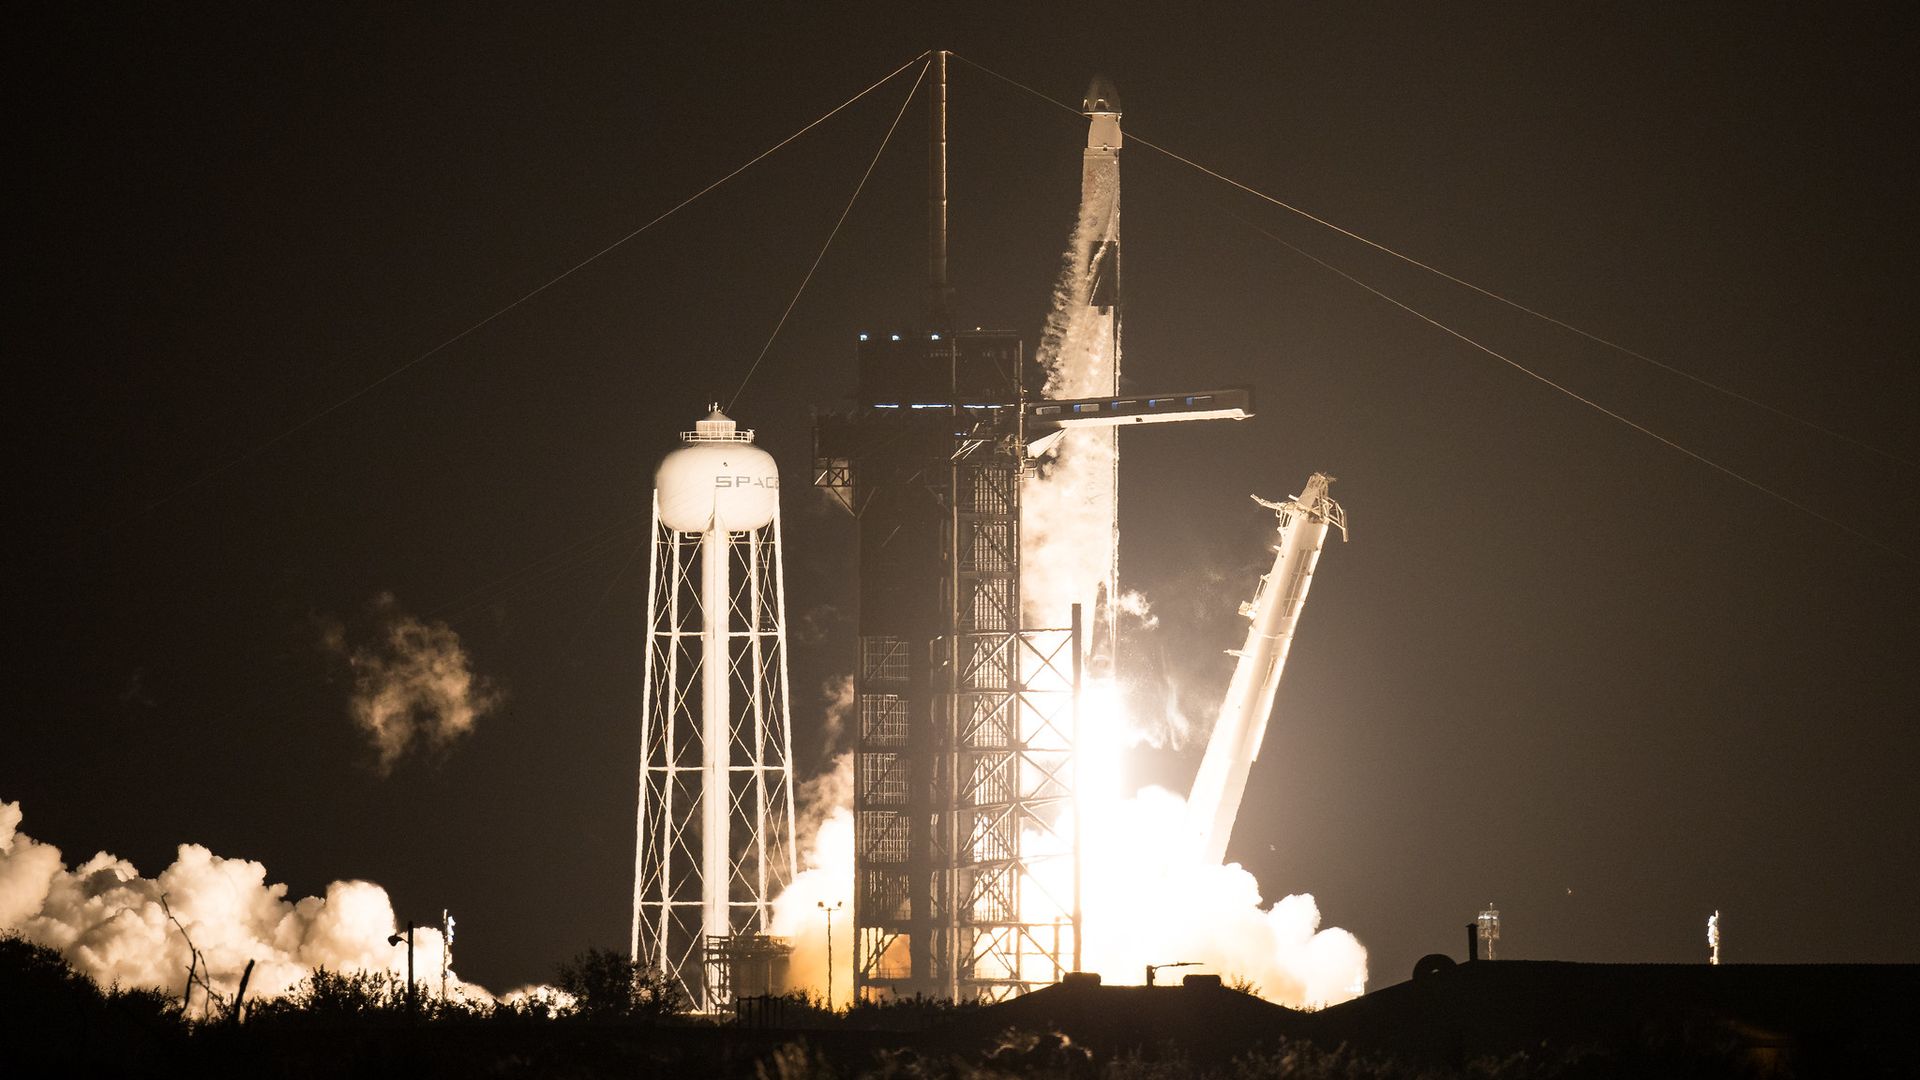 A SpaceX Falcon 9 rocket launching at night